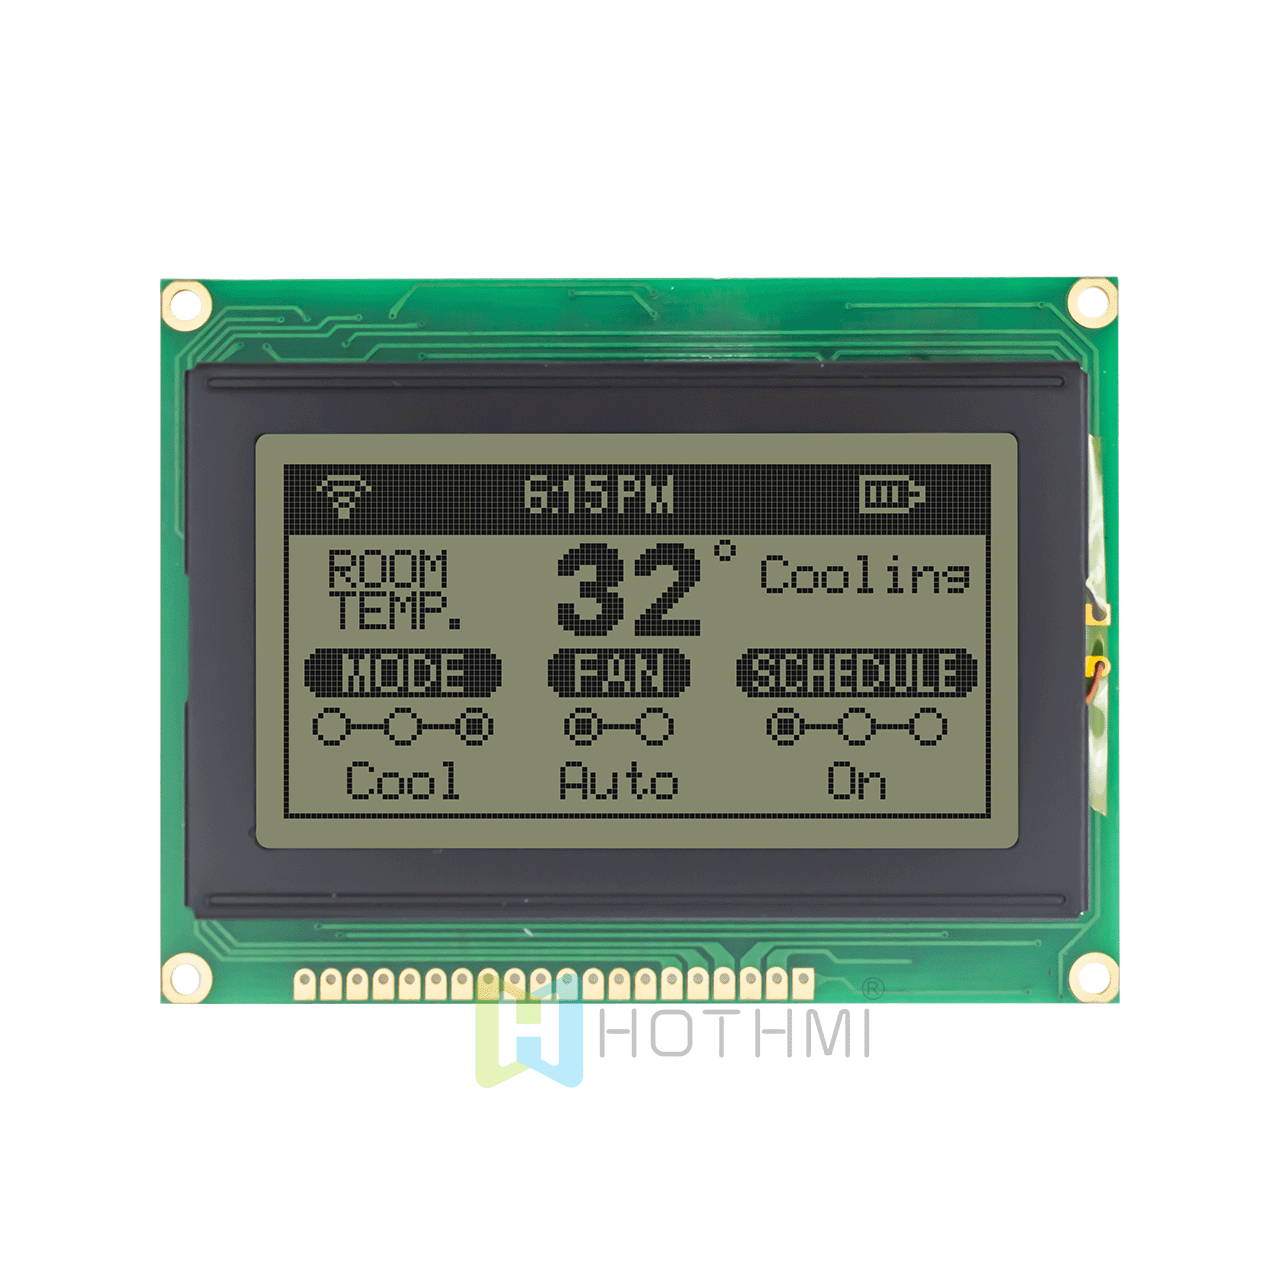 3.2"5.0V/low cost white background graphic display/128x64 graphic LCD module/FSTN forward/white gray image//KS0108/ks0107 or compatible